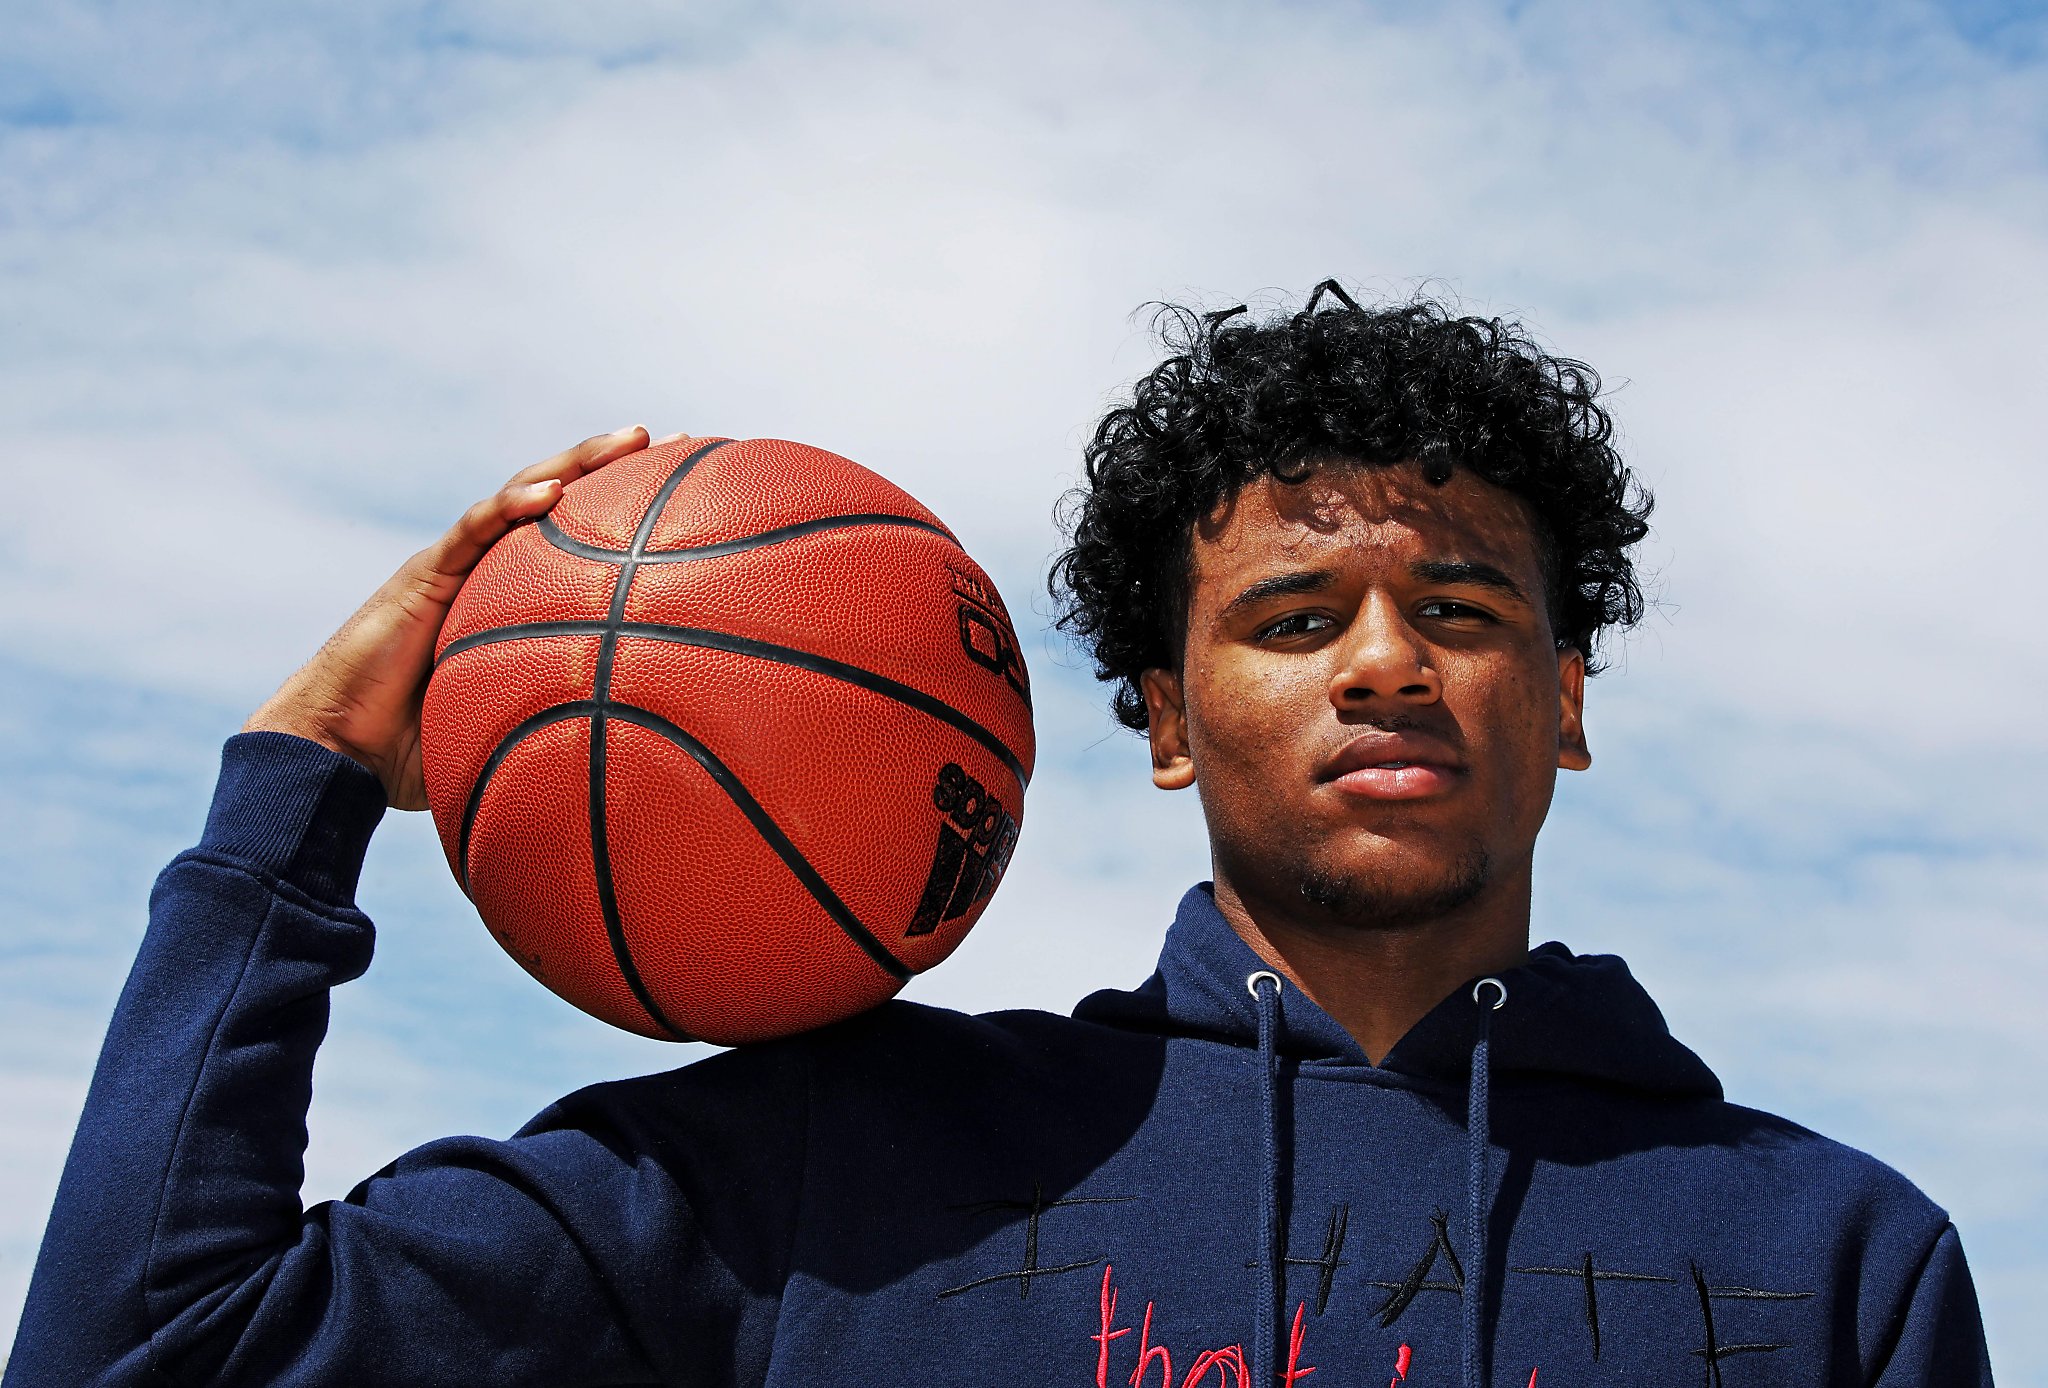 Jalen Green, top basketball recruit out of Napa, picks G League over  college - SFChronicle.com